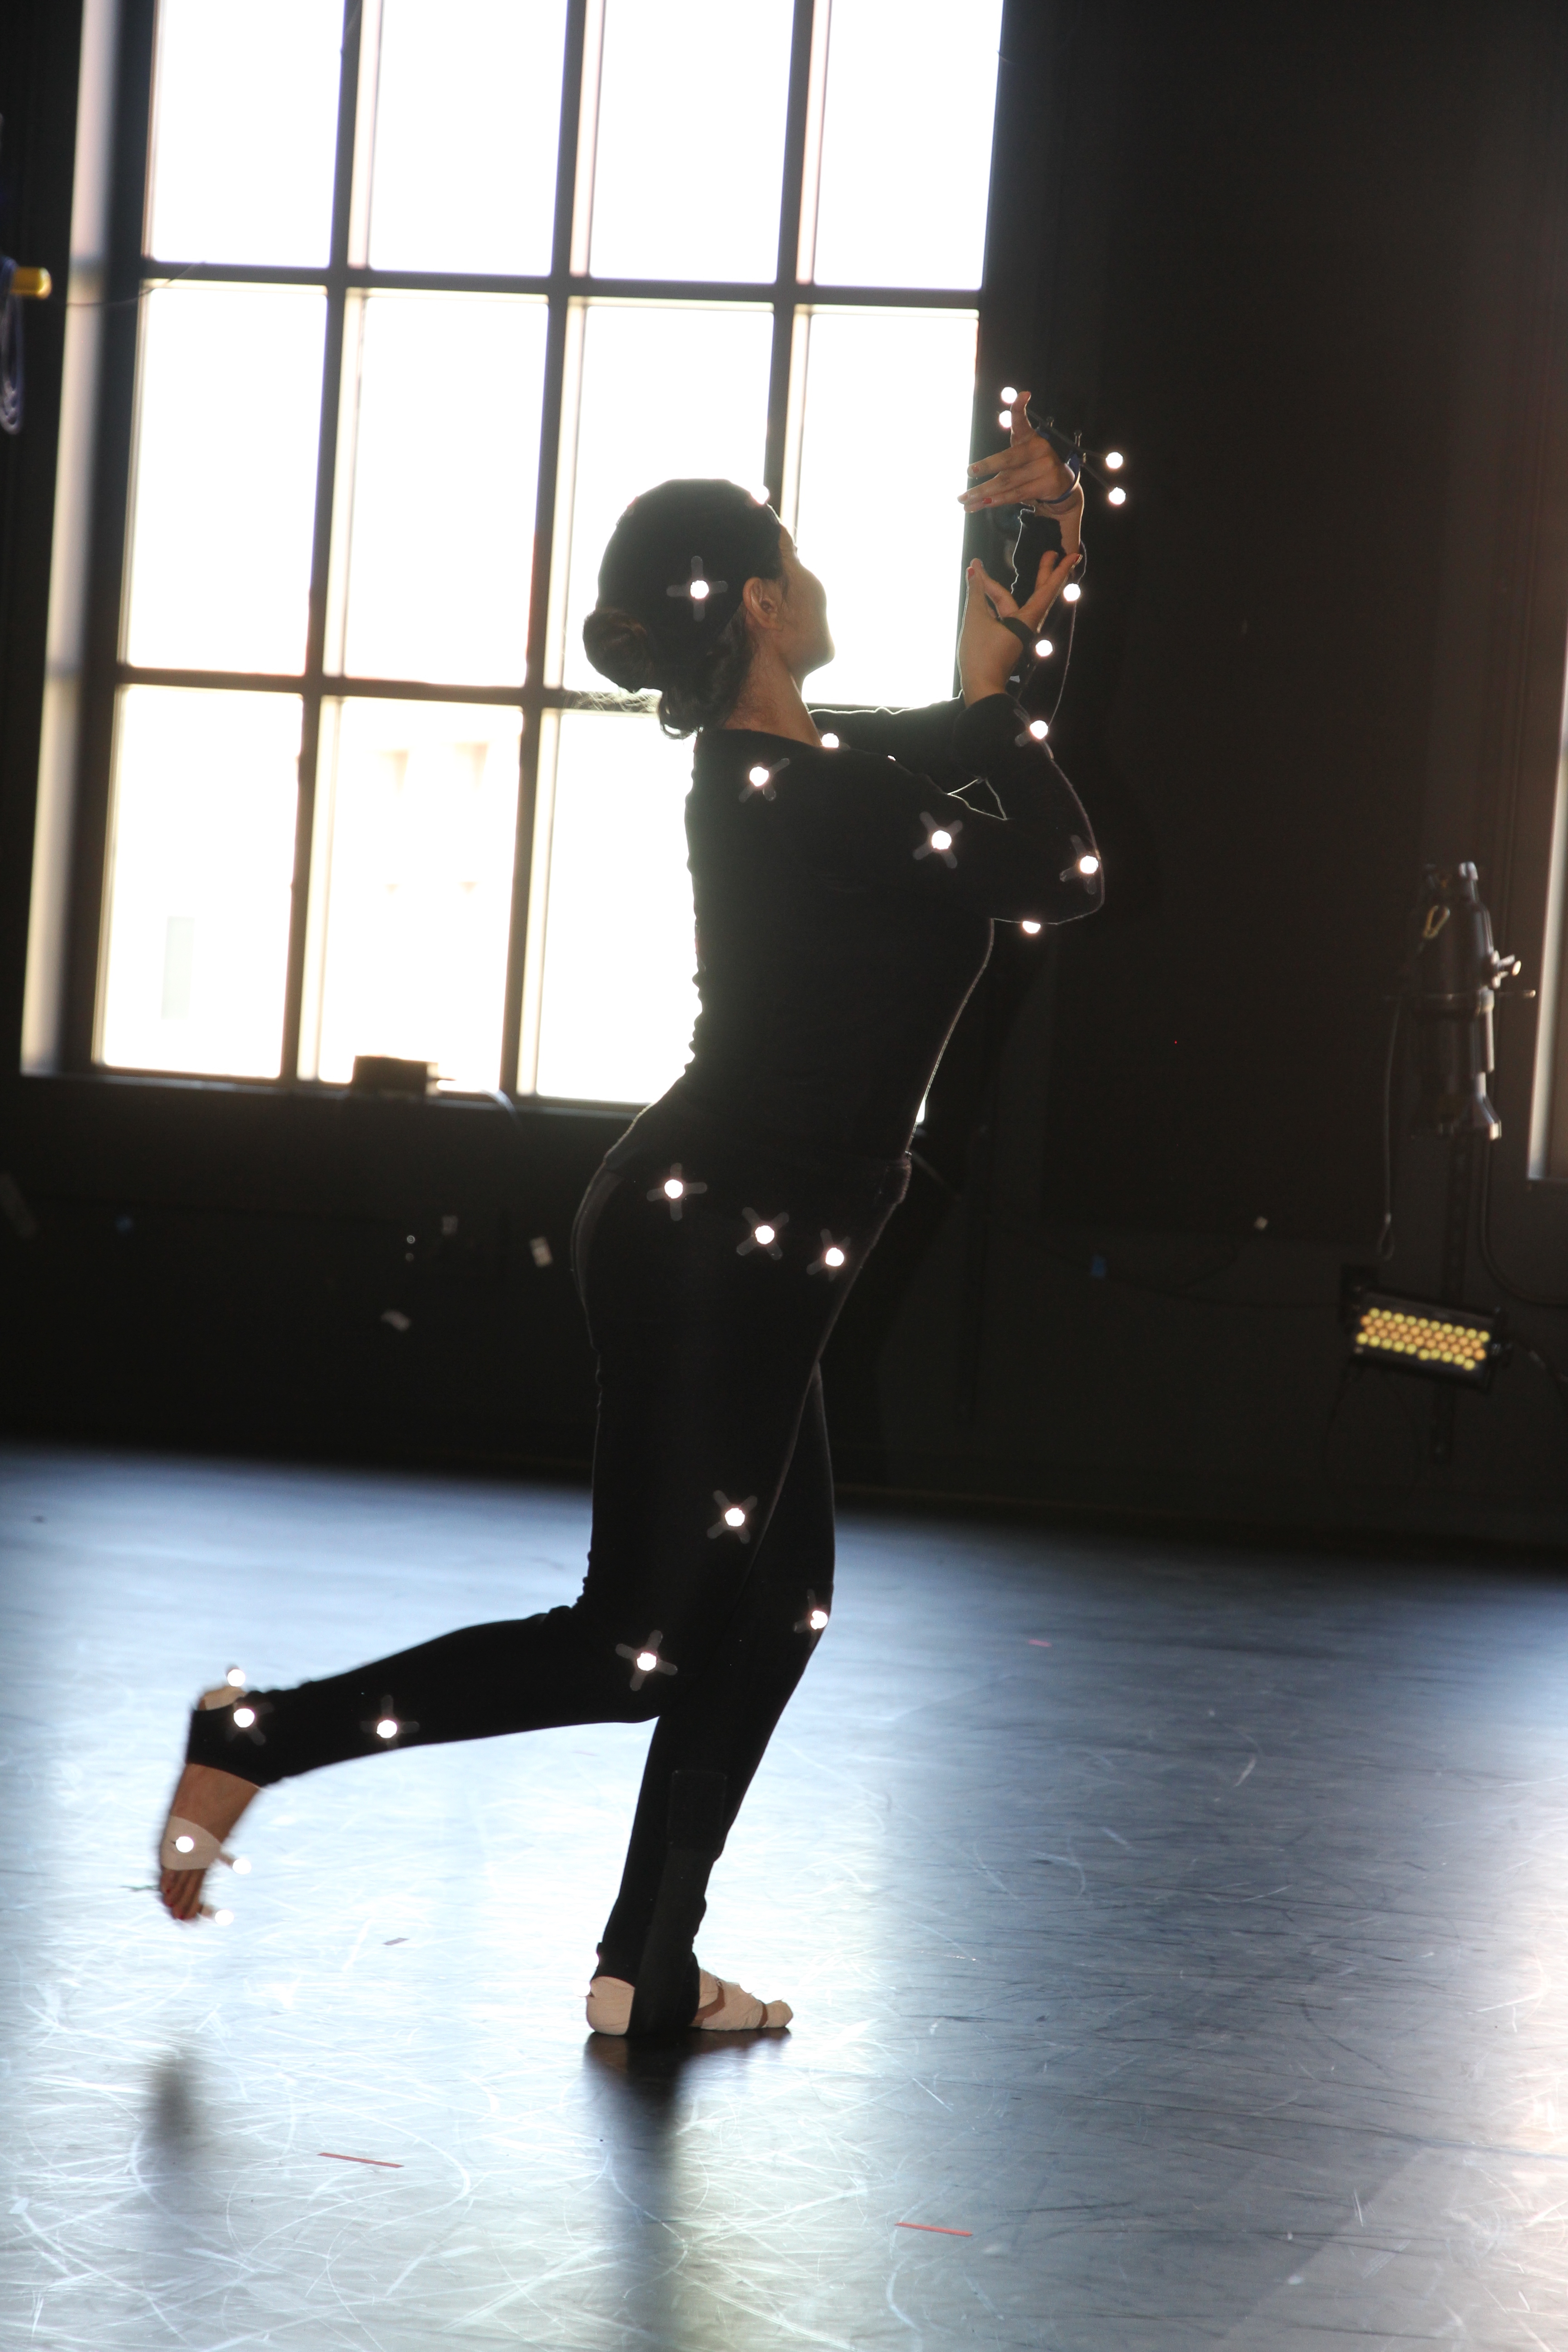 woman wearing black dancing; small lights are placed on limbs, waist, and head